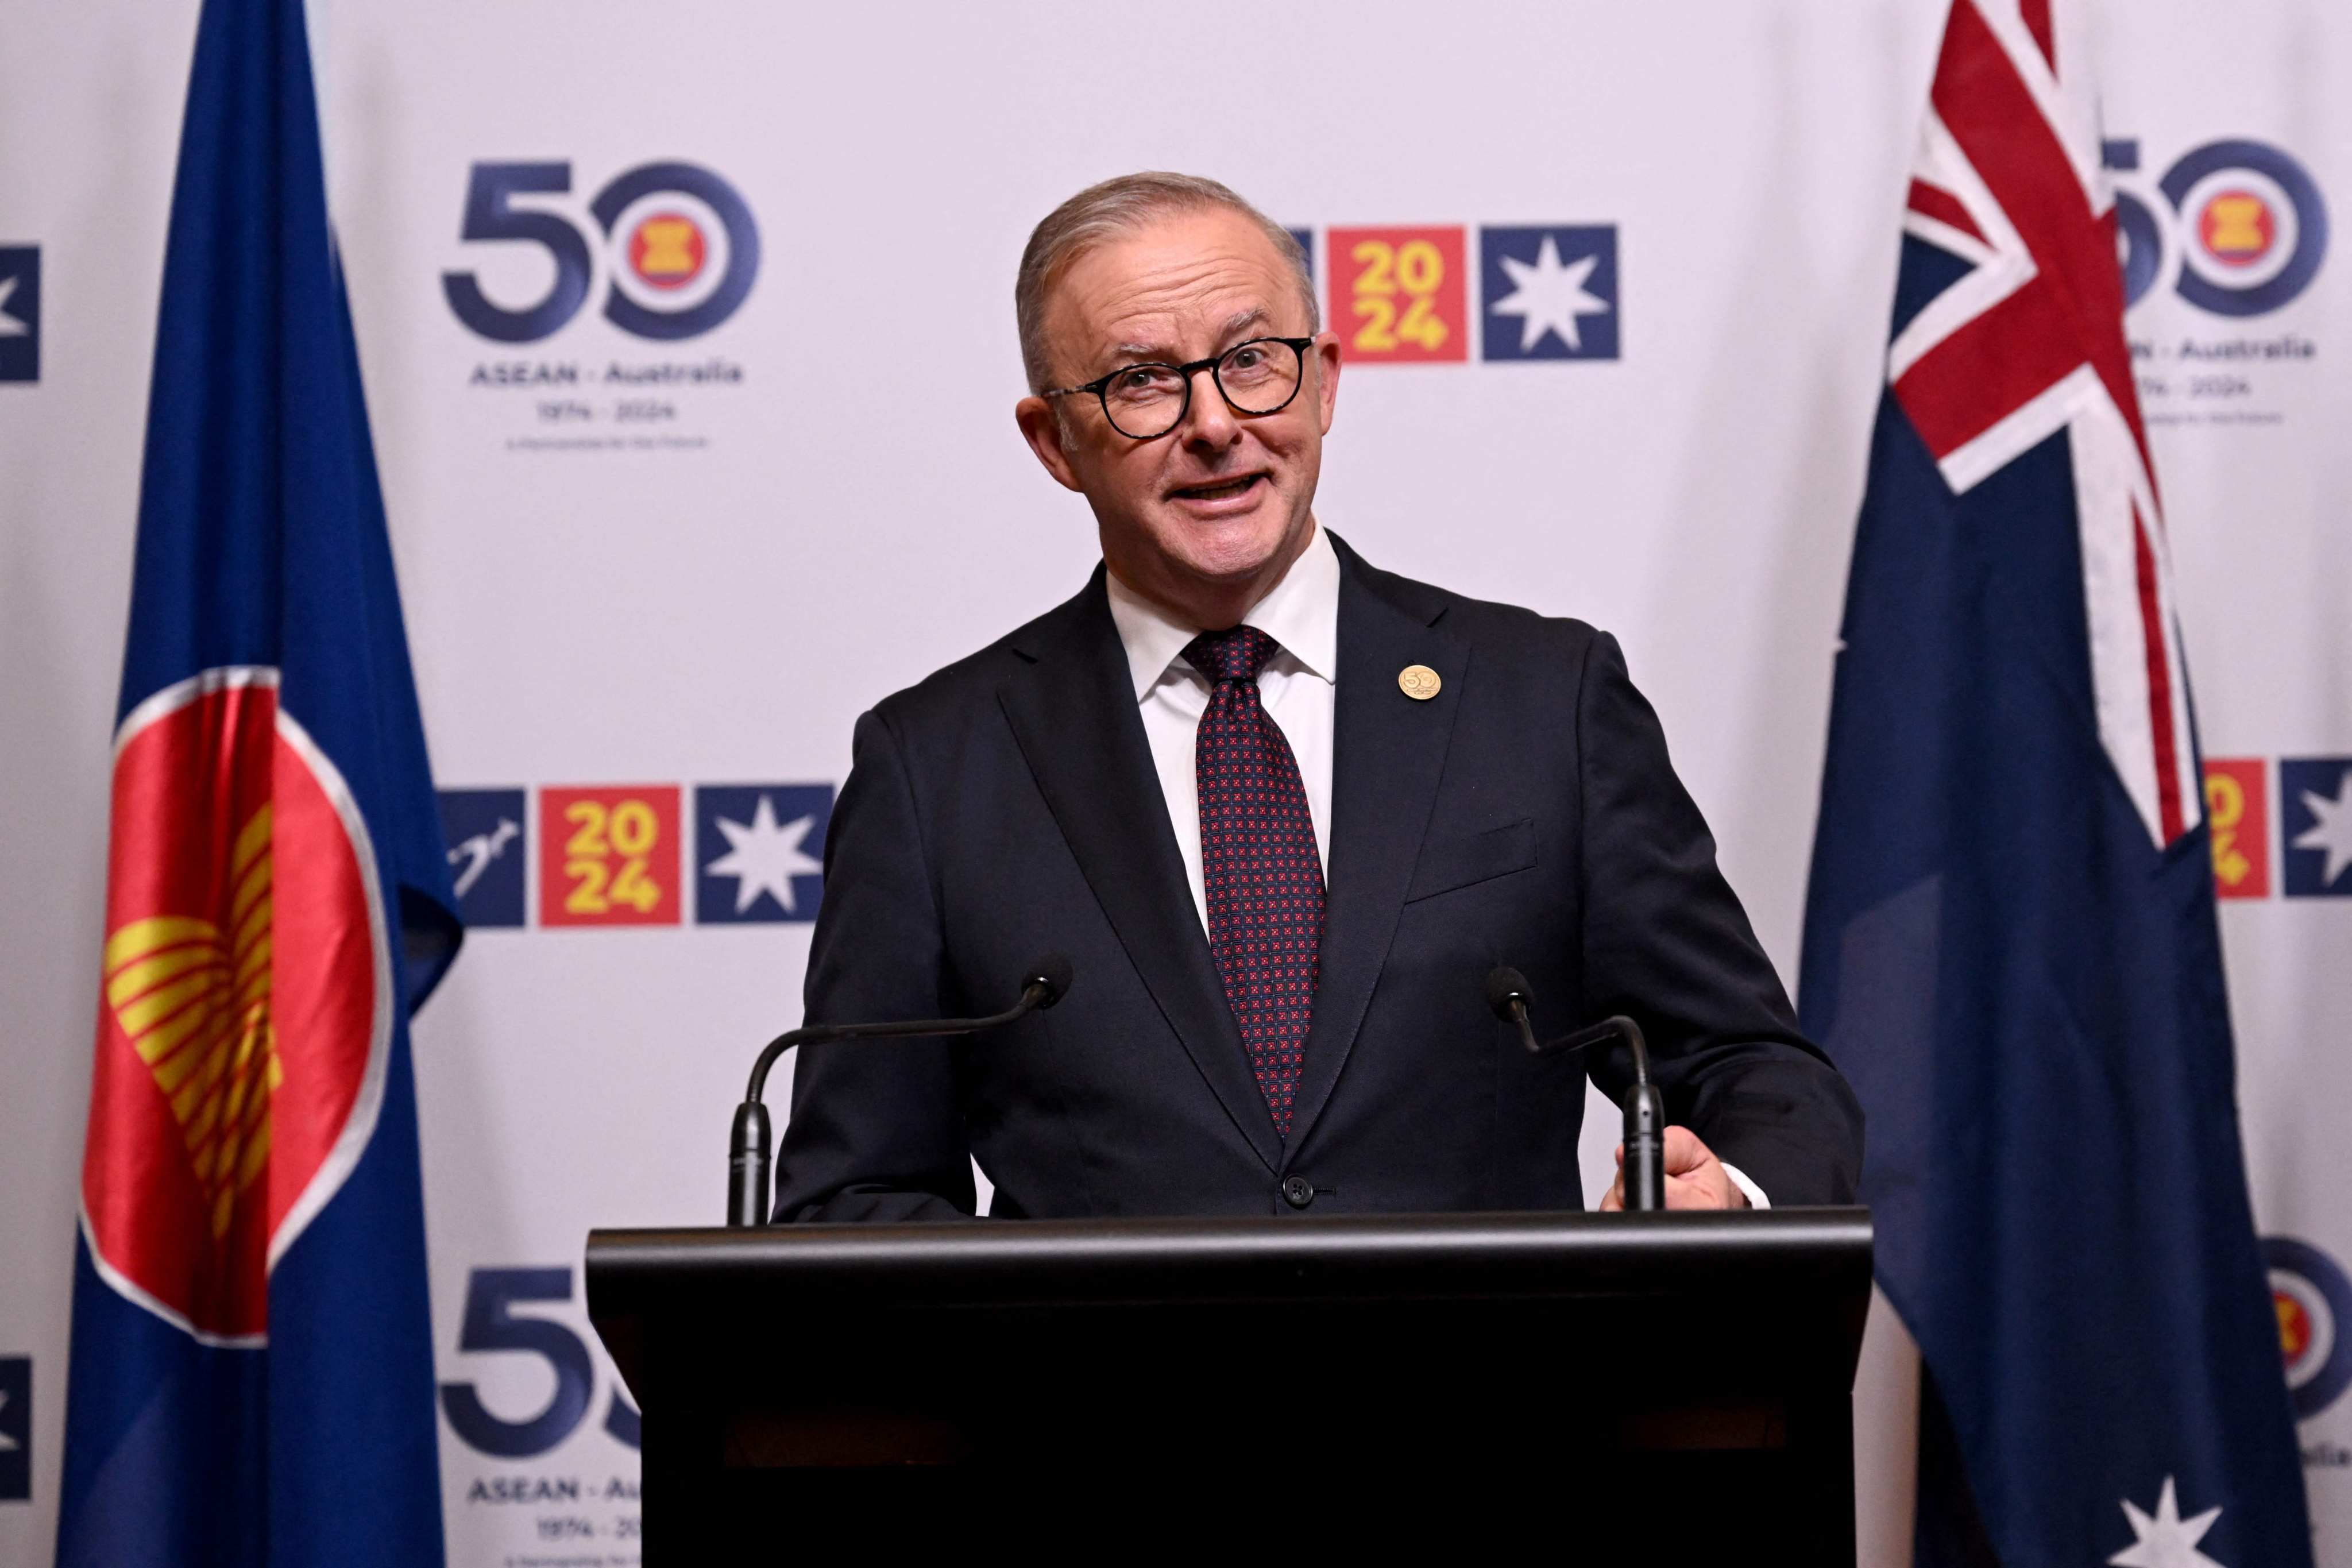 Australia’s Prime Minister Anthony Albanese speaks at the Asean-Australia special summit in Melbourne on Tuesday. “We must act together, and we must act now,” he said. Photo: AFP